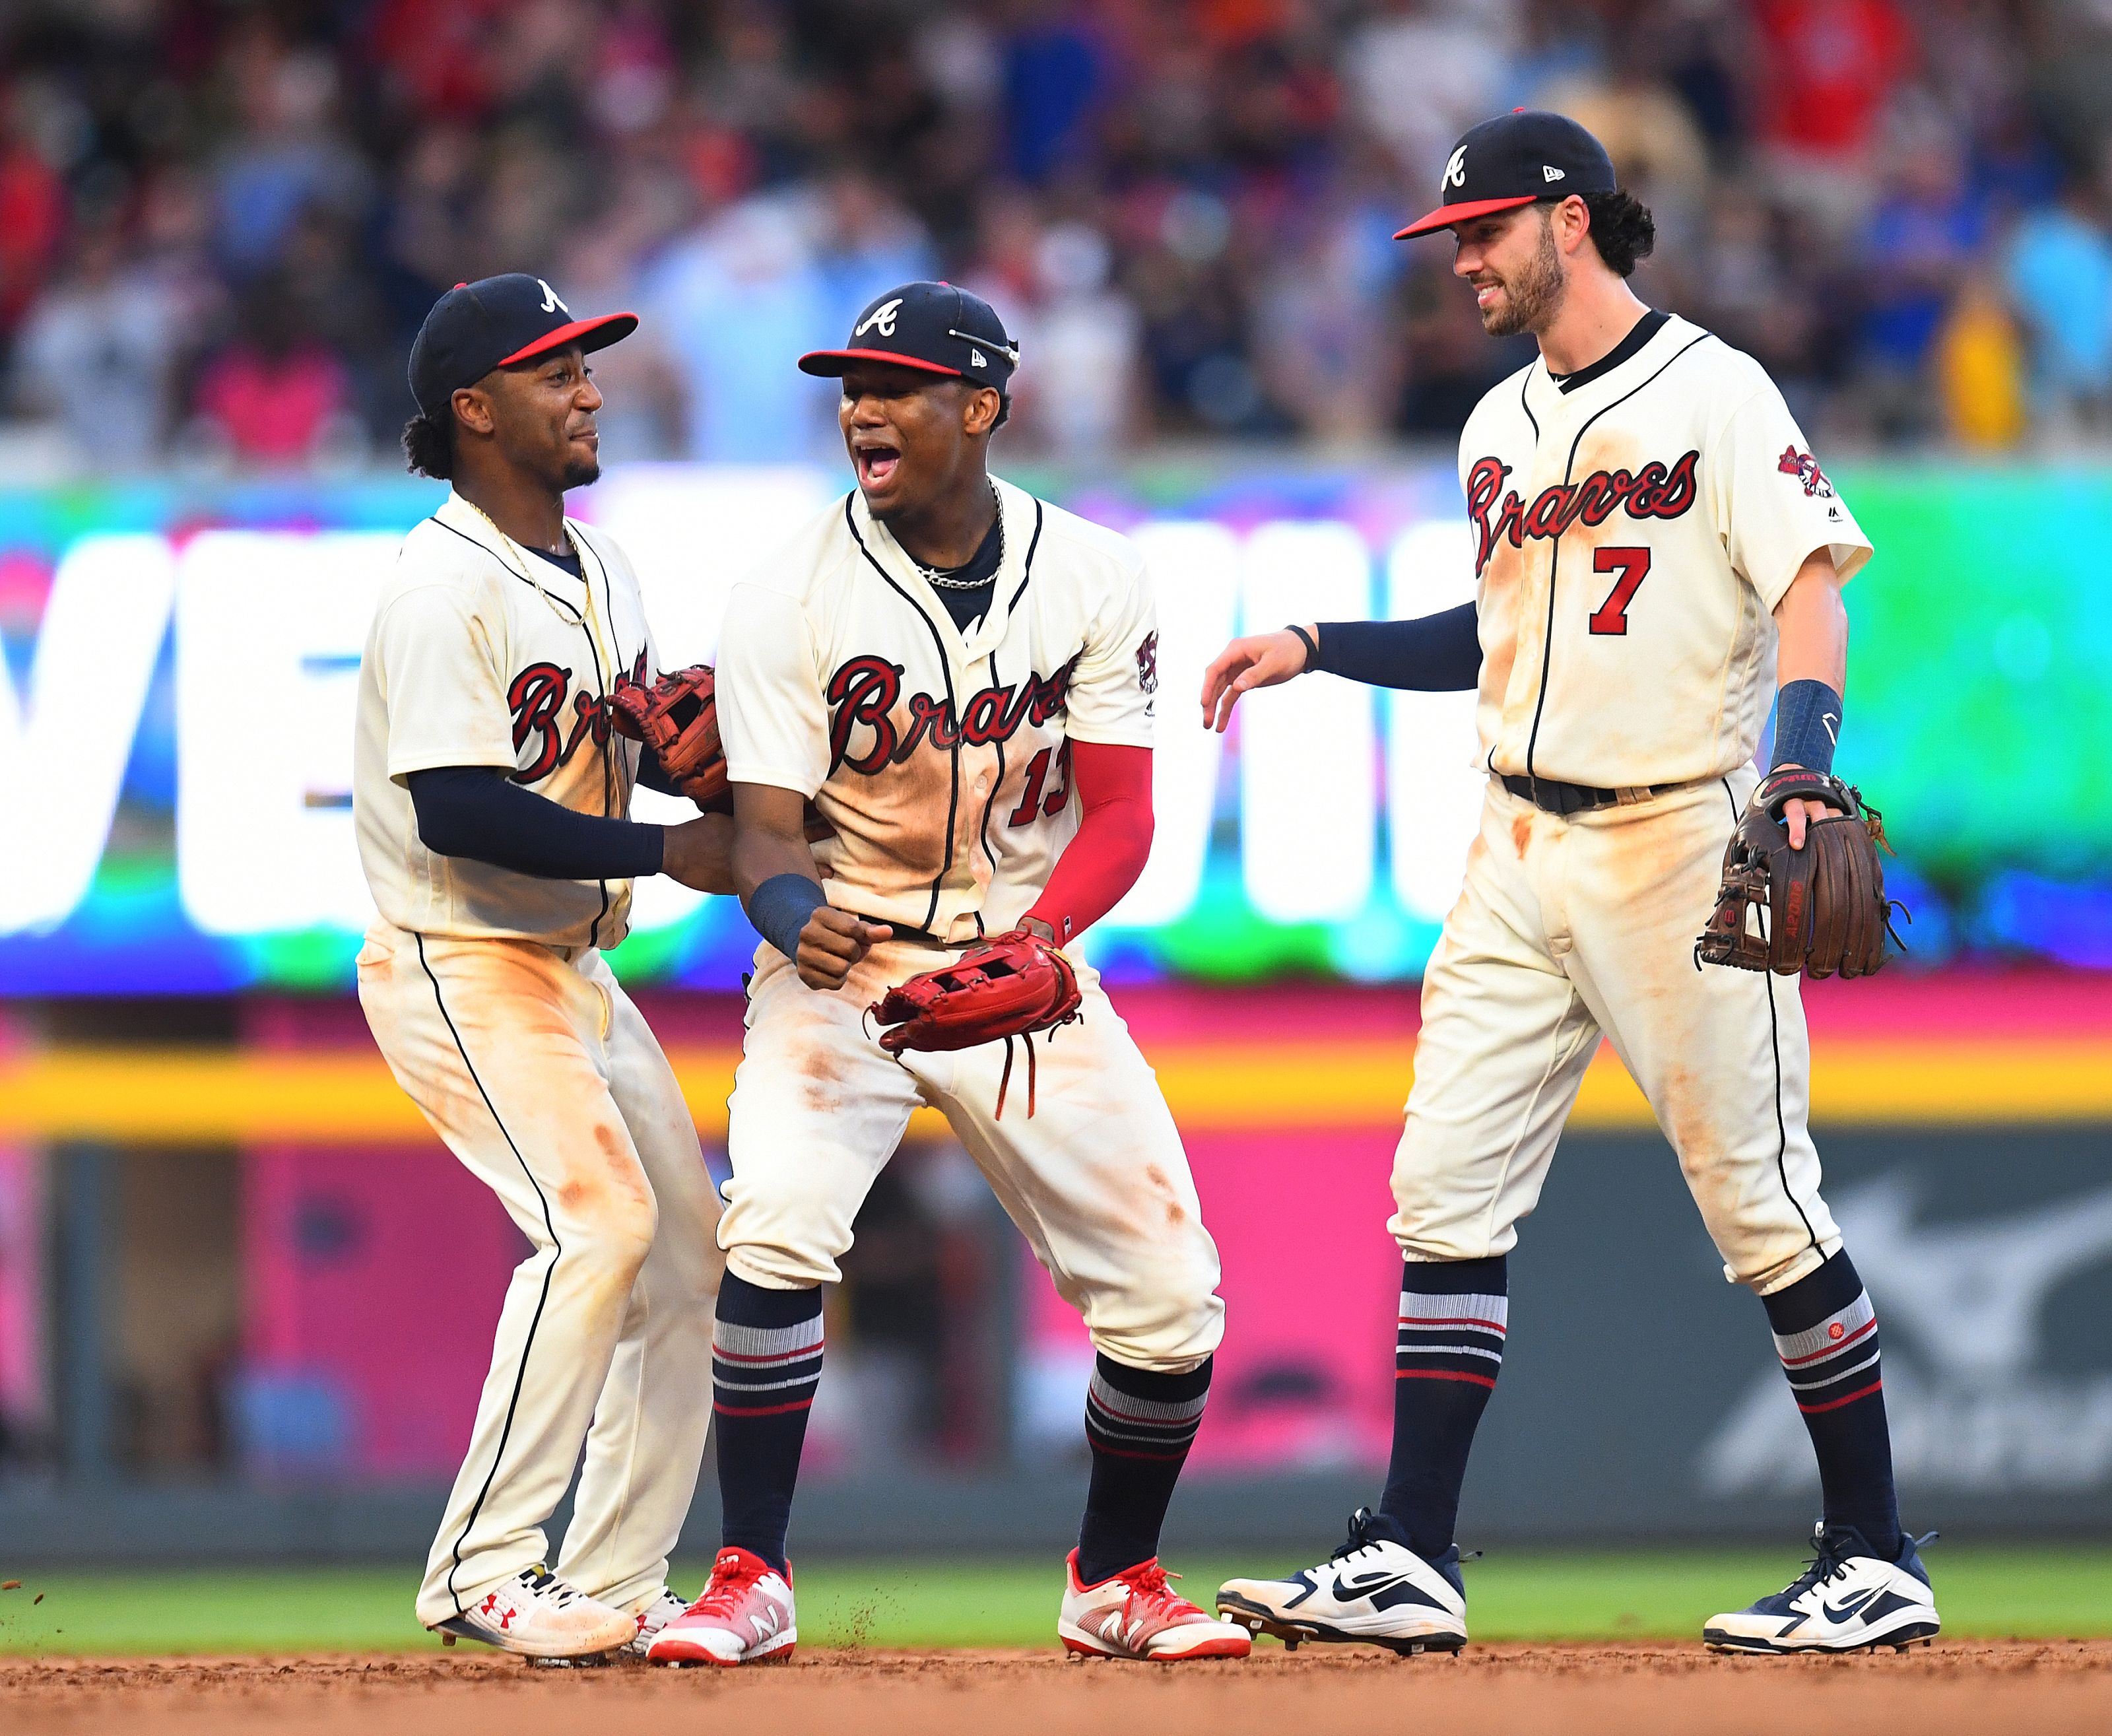 Atlanta Braves: A Look Ahead to the 2019 Schedule With What